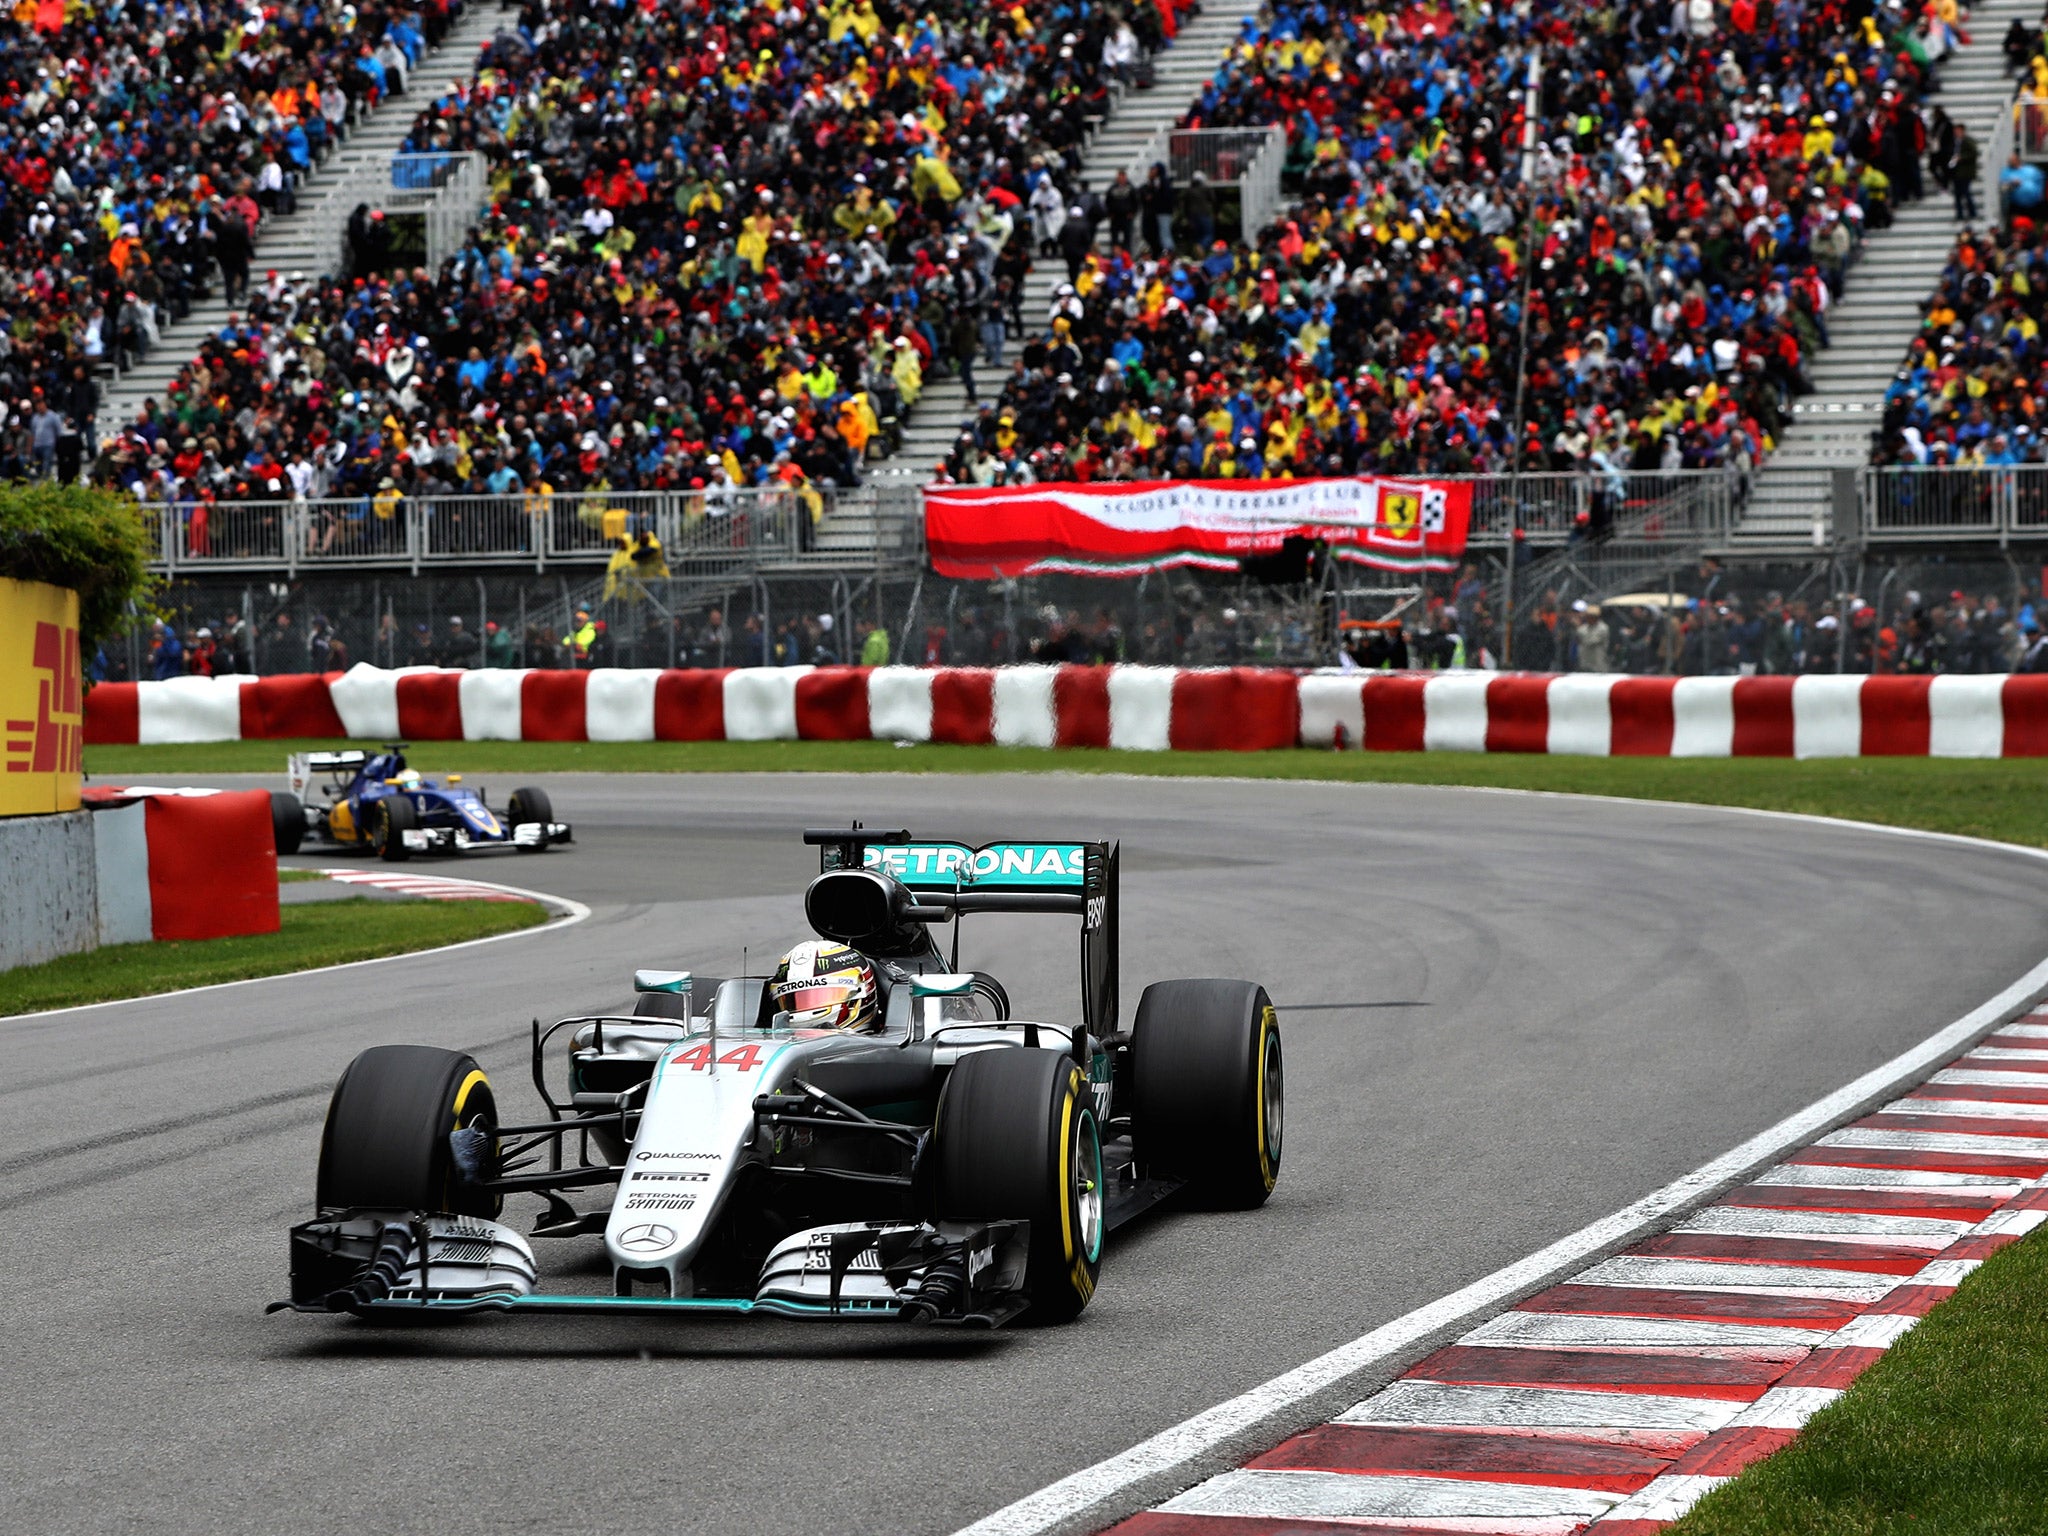 &#13;
Hamilton on his way to victory in the Canadian Grand Prix &#13;